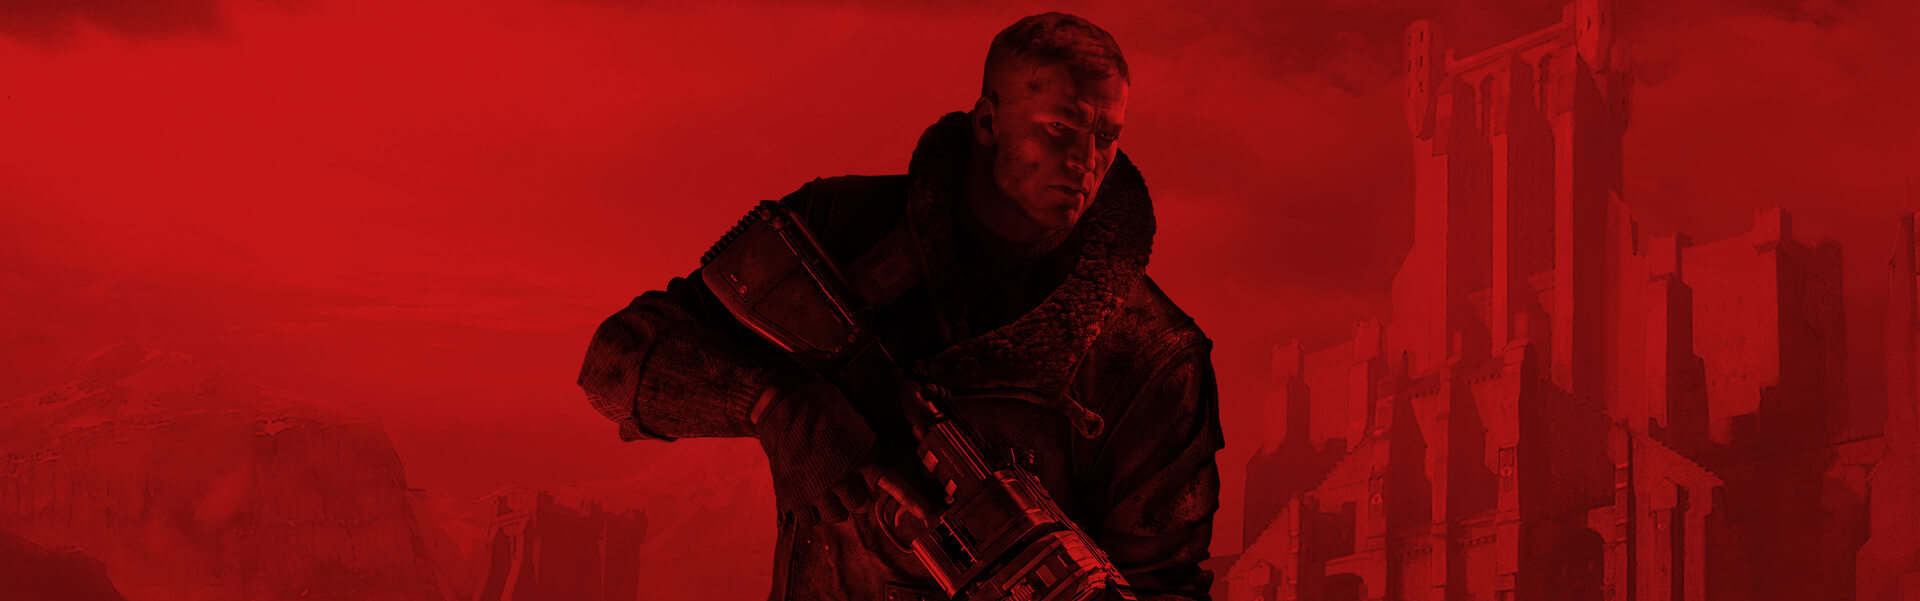 Buy Wolfenstein®: The Old Blood Steam Key, Instant Delivery